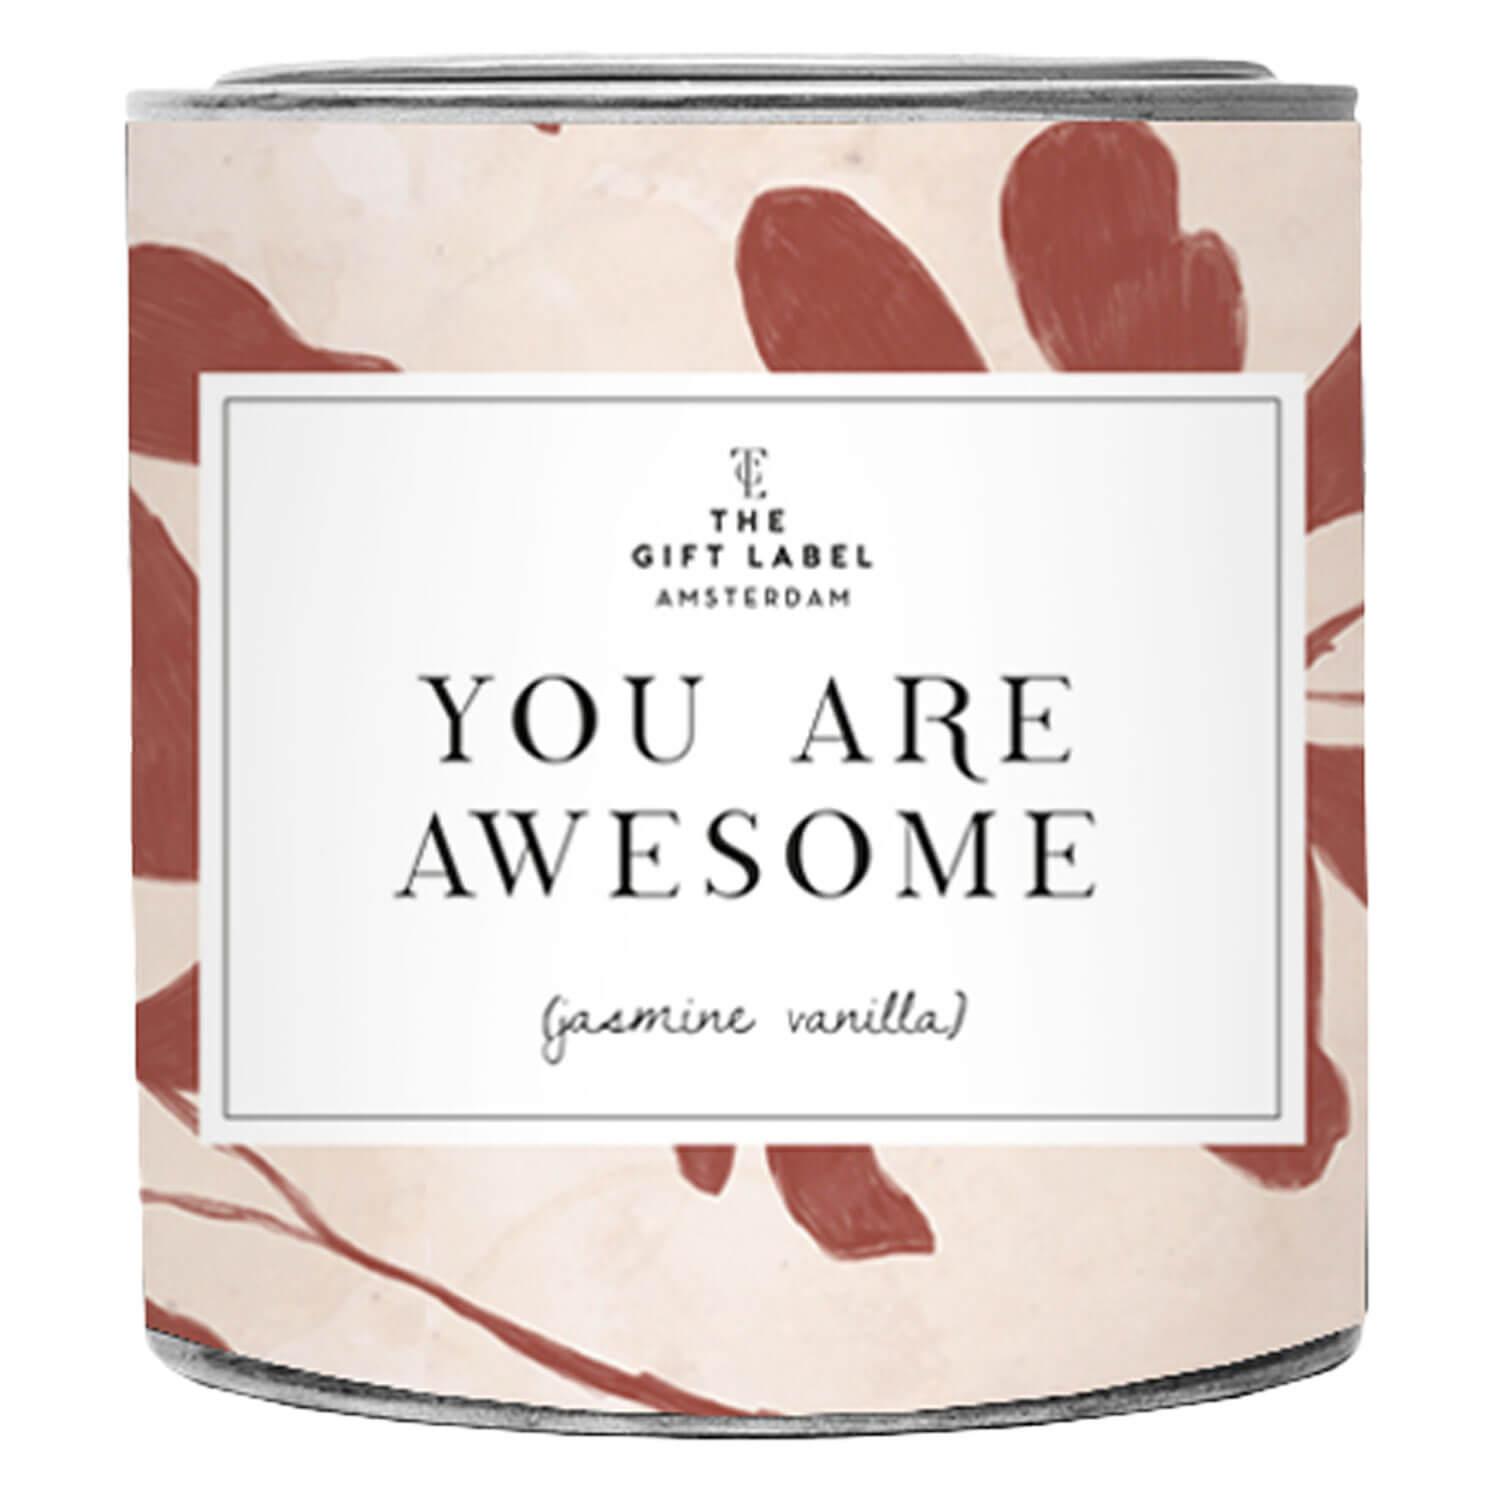 TGL Home - Candle Jasmine Vanilla You Are Awesome